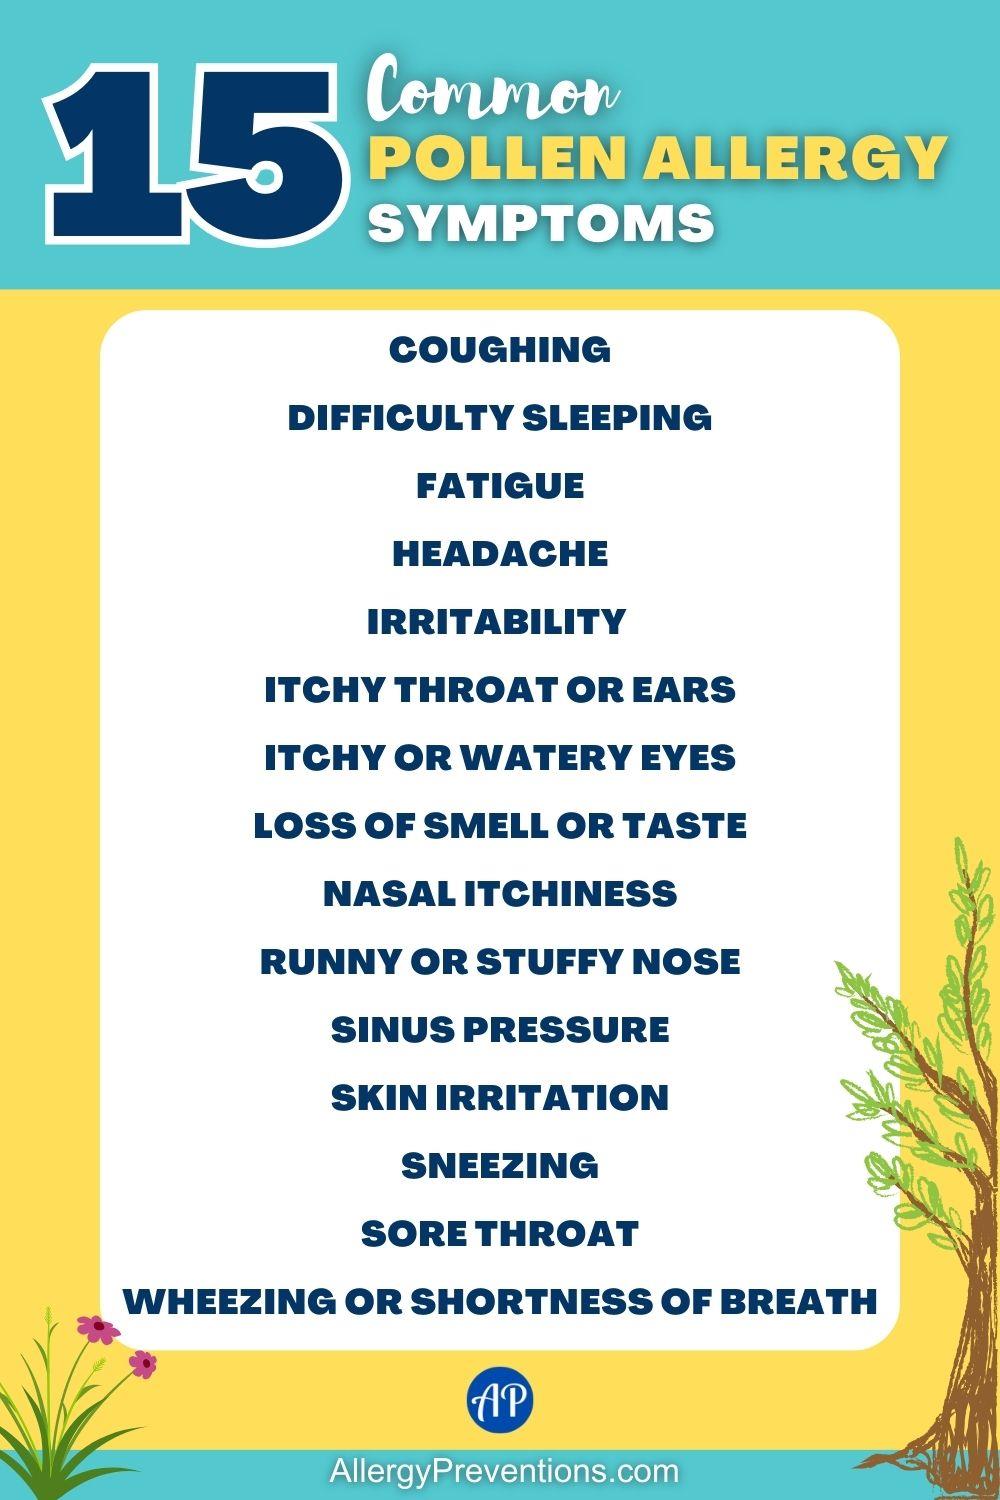 Common pollen allergy symptoms infographic. Here are the common pollen allergy symptoms: Coughing, difficulty sleeping, fatigue, Headache, irritability , Itchy Throat or Ears, Itchy or Watery Eyes, Loss of Smell or Taste, Nasal Itchiness, Runny or Stuffy Nose, Sinus Pressure, Skin Irritation, Sneezing, Sore Throat, and Wheezing or Shortness of Breath.